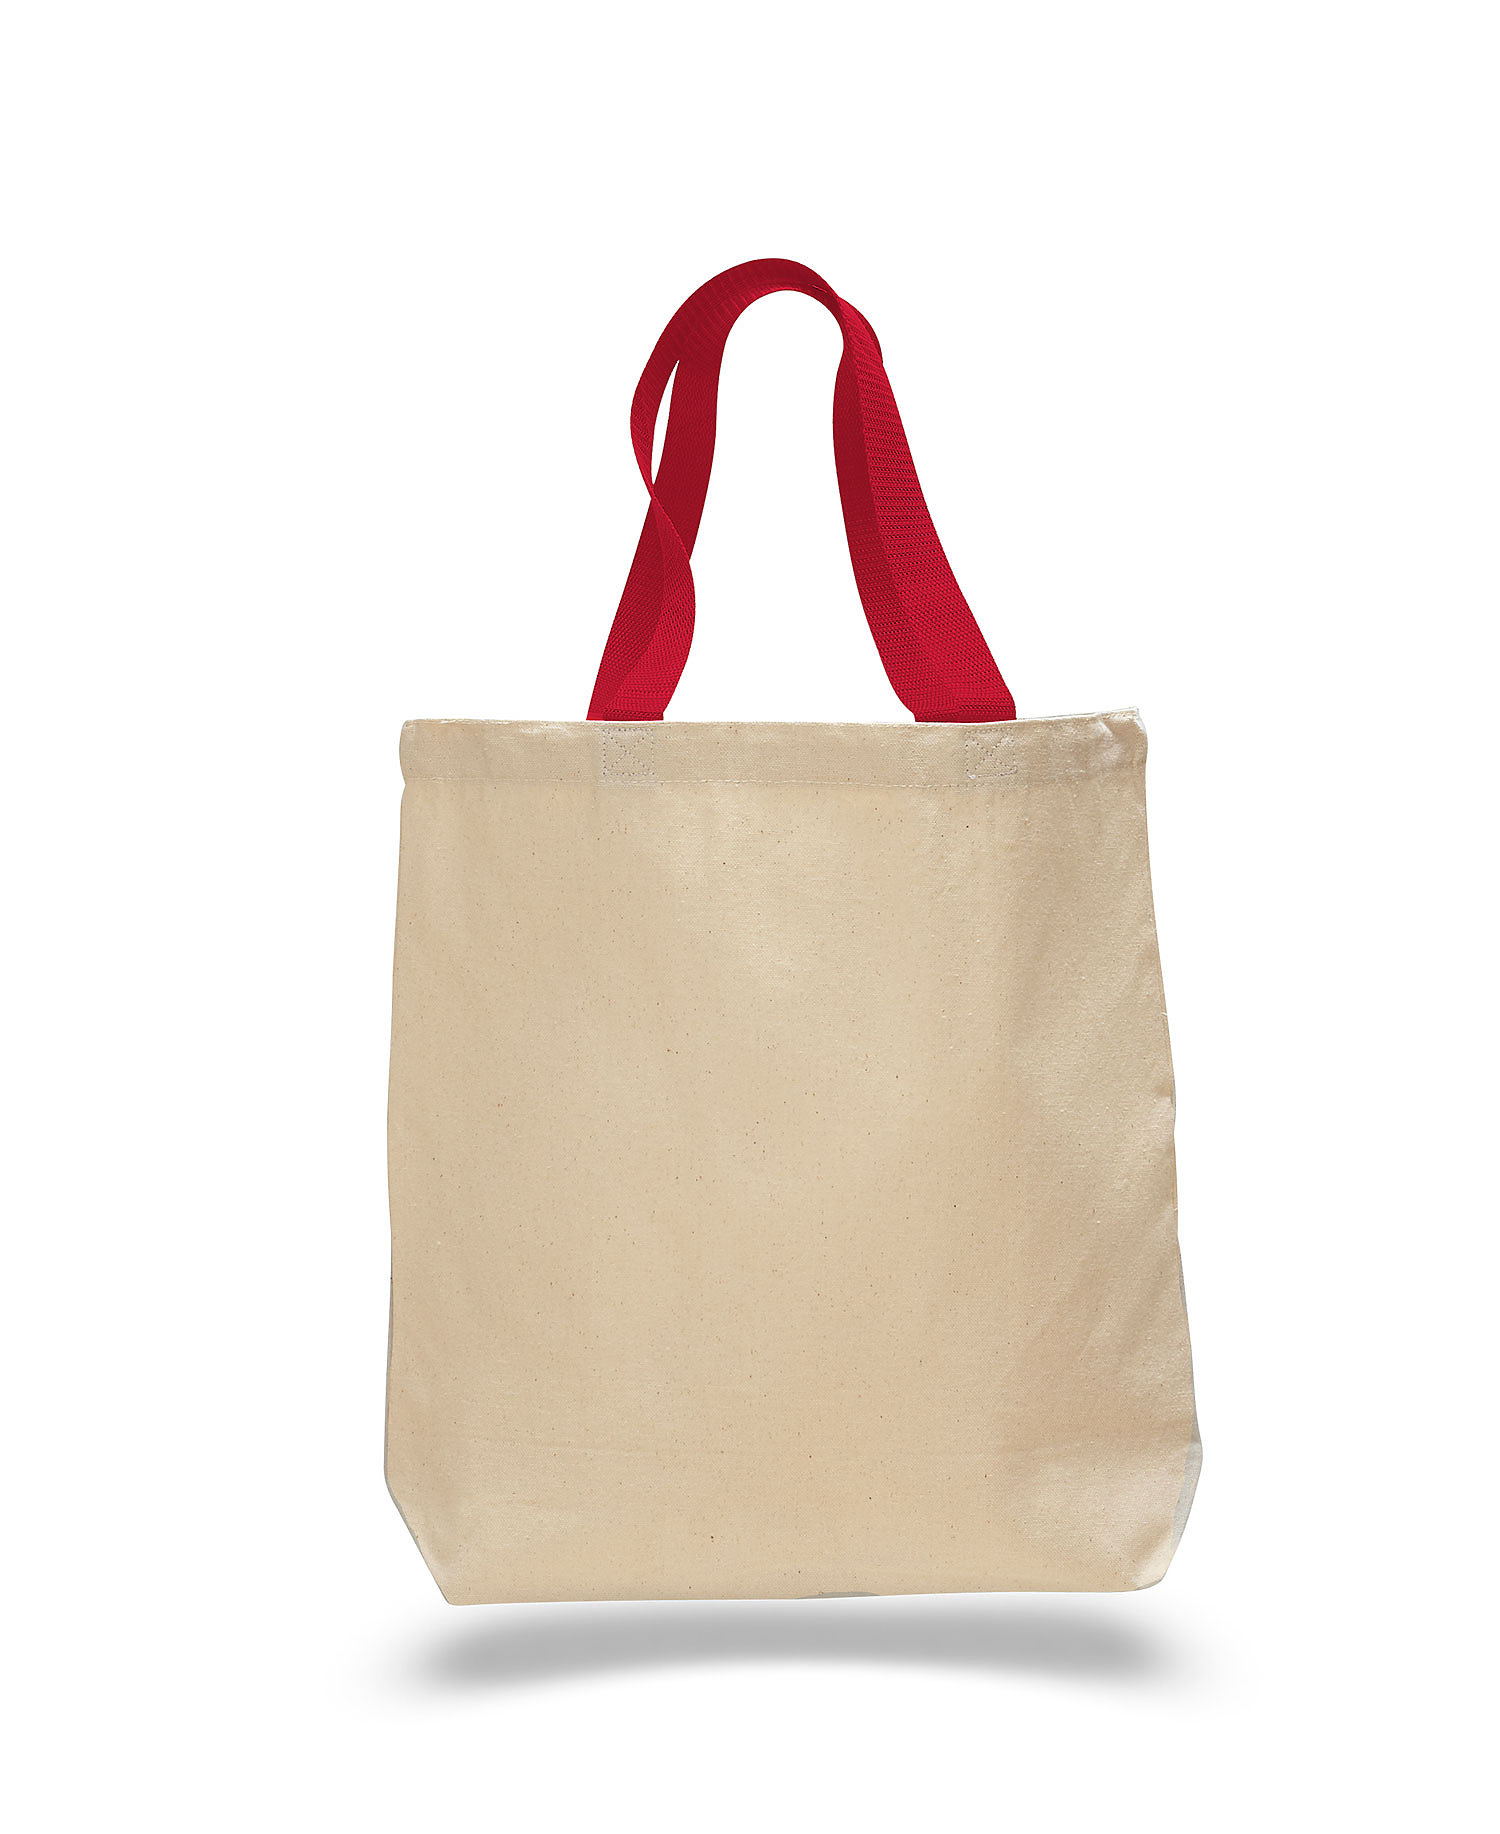 Q-Tees Q4400 - 11L Canvas Tote With Color Handles $2.35 - Bags